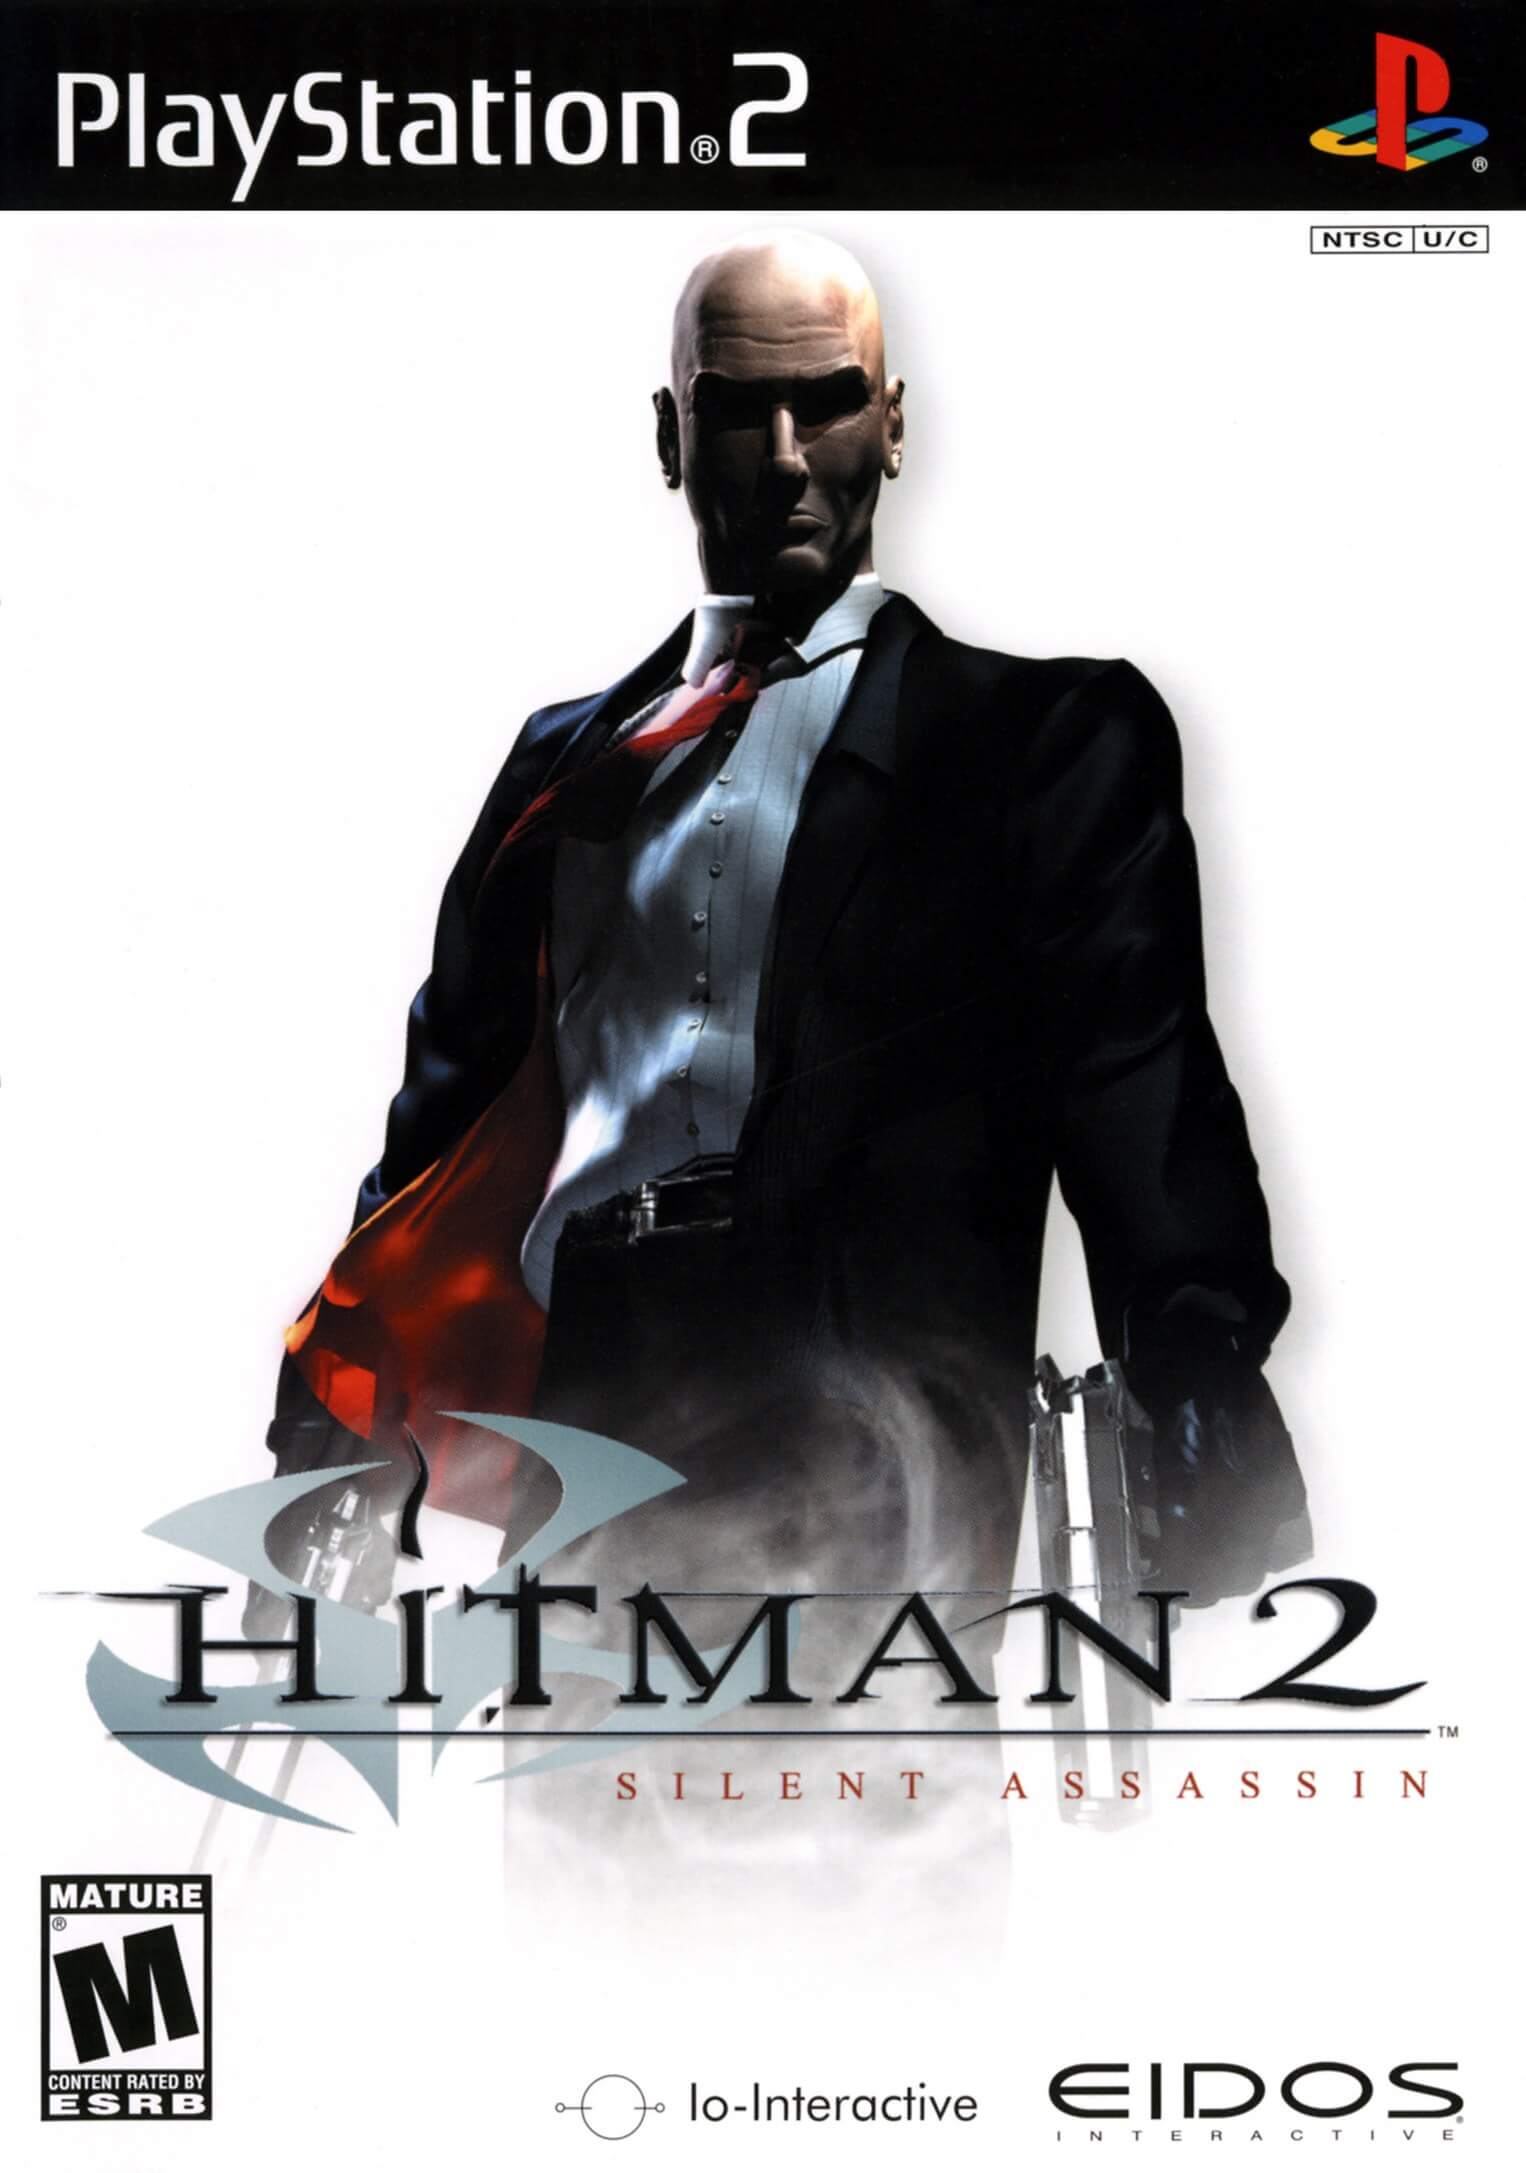 How Many Missions In Hitman 2 Silent Assassin